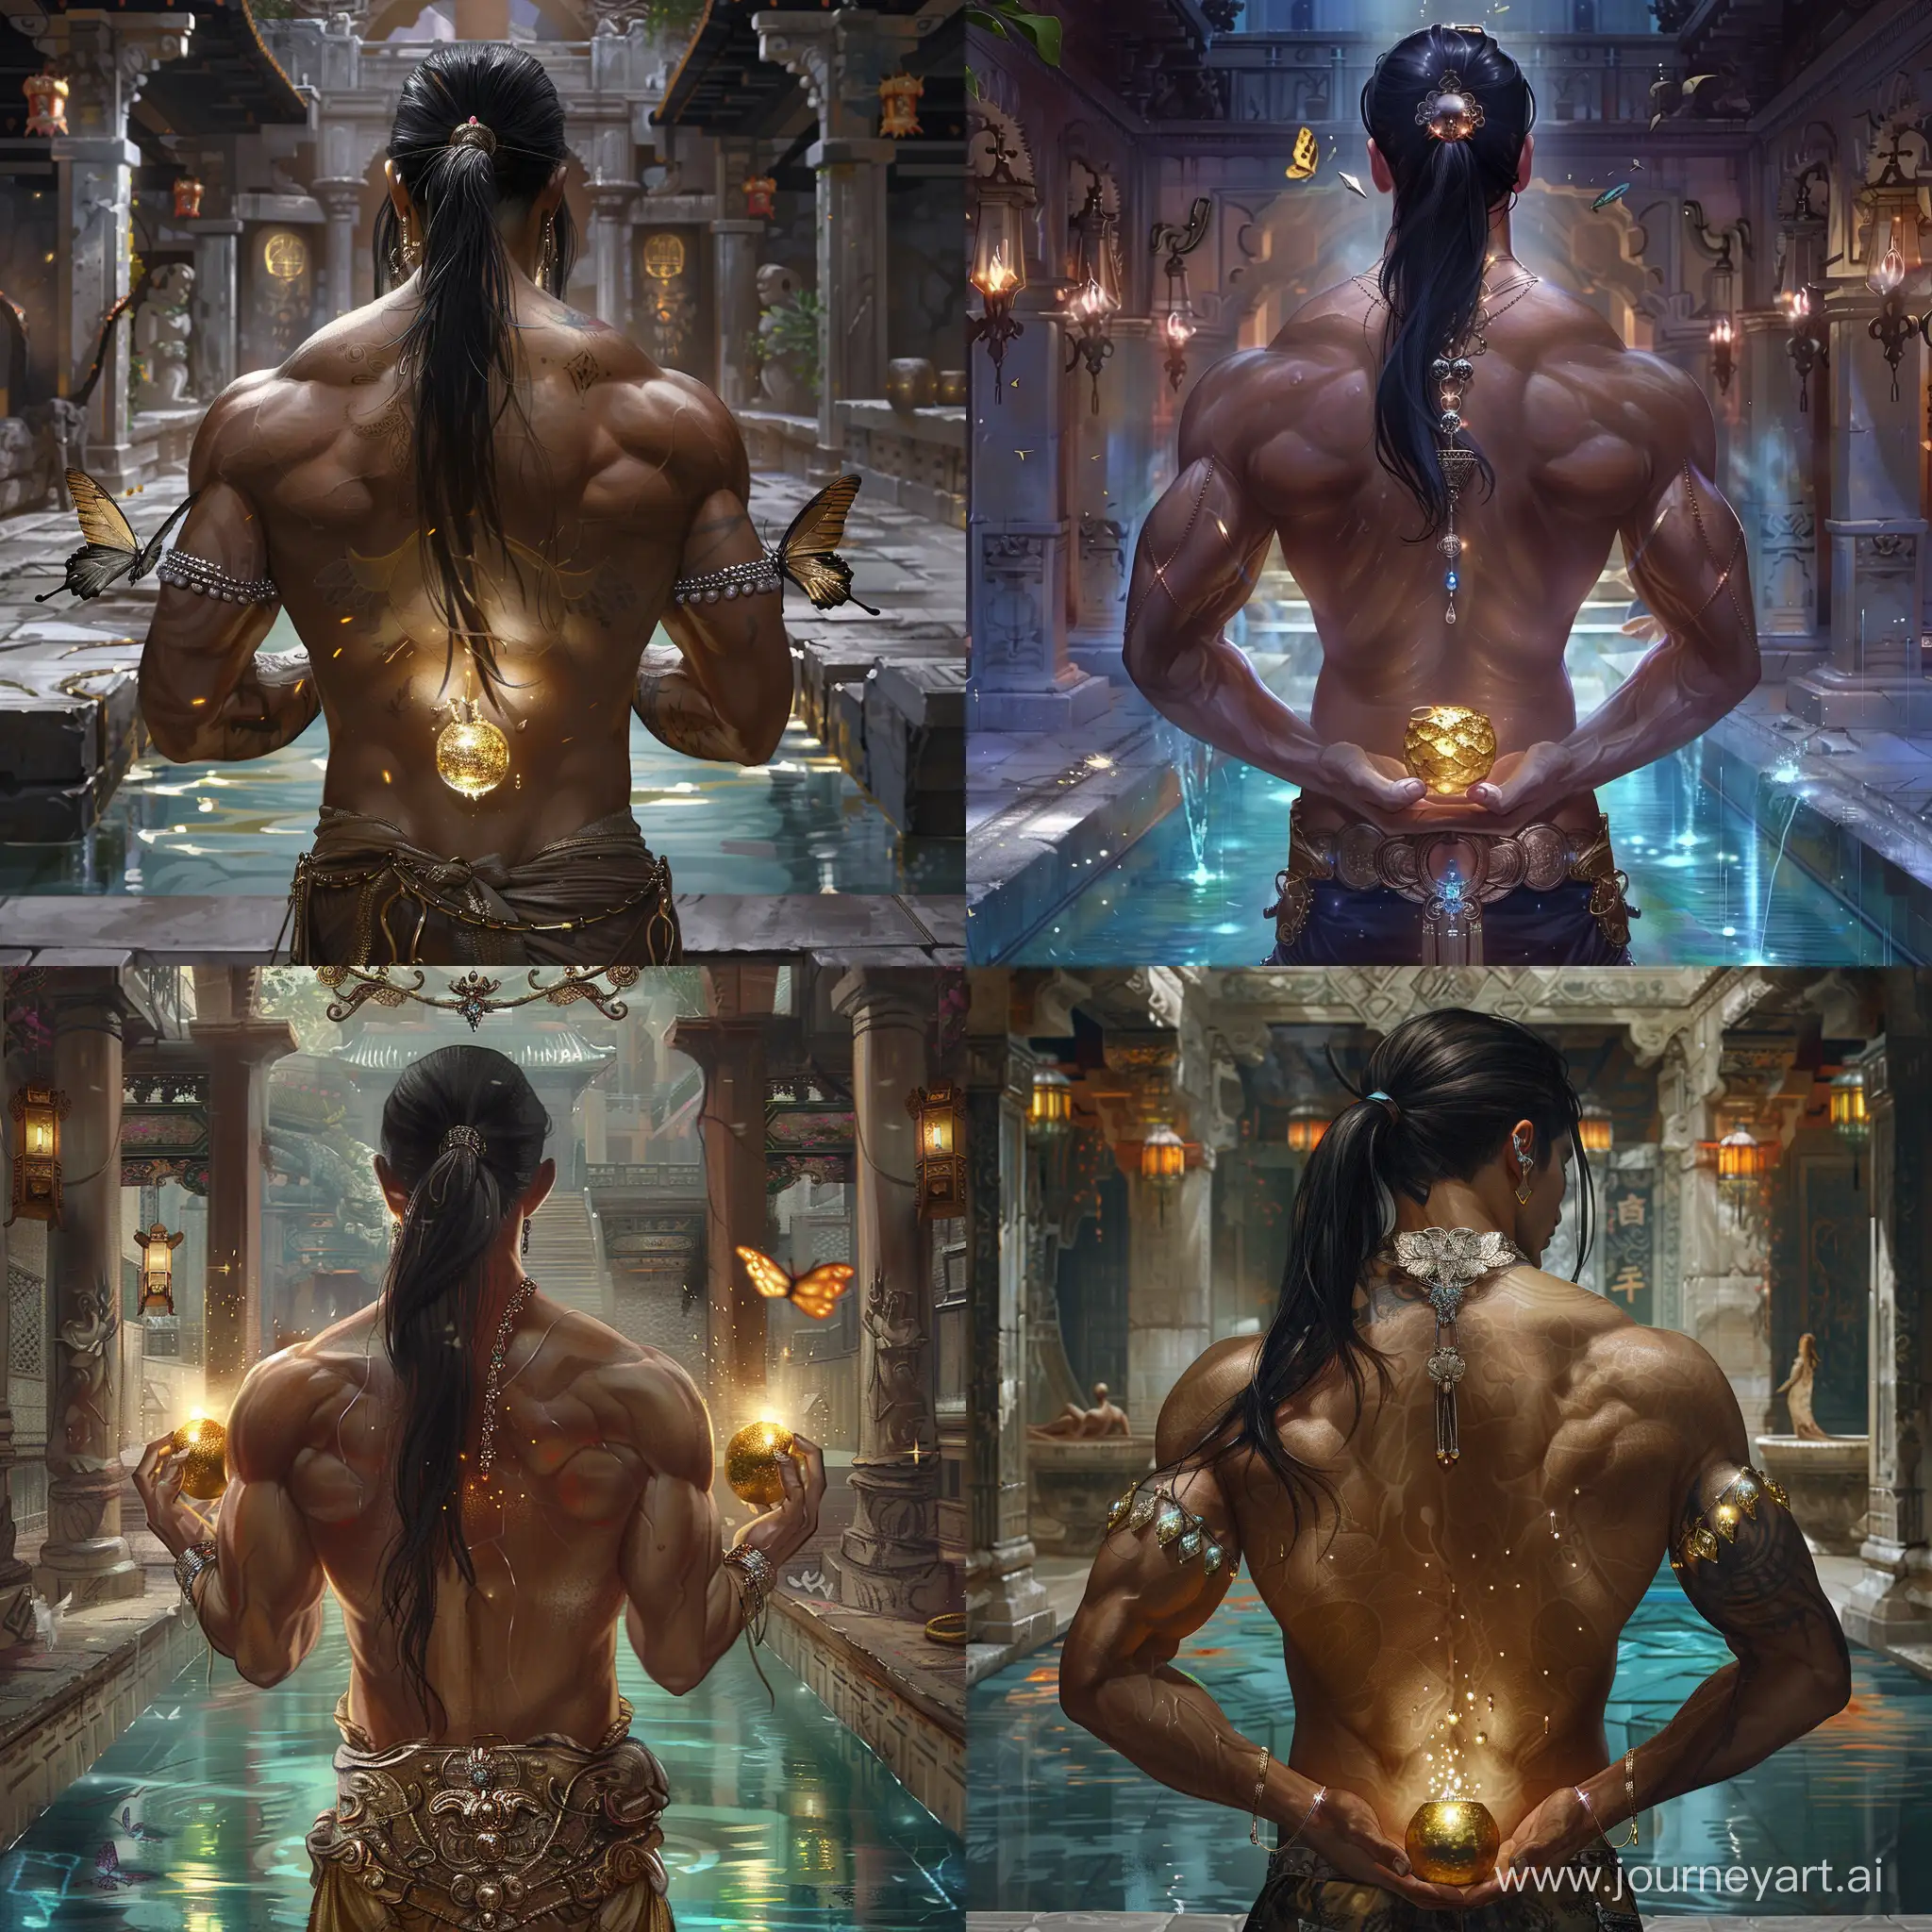 Muscular-Man-with-Golden-Apple-in-Magical-Asian-Fantasy-Setting